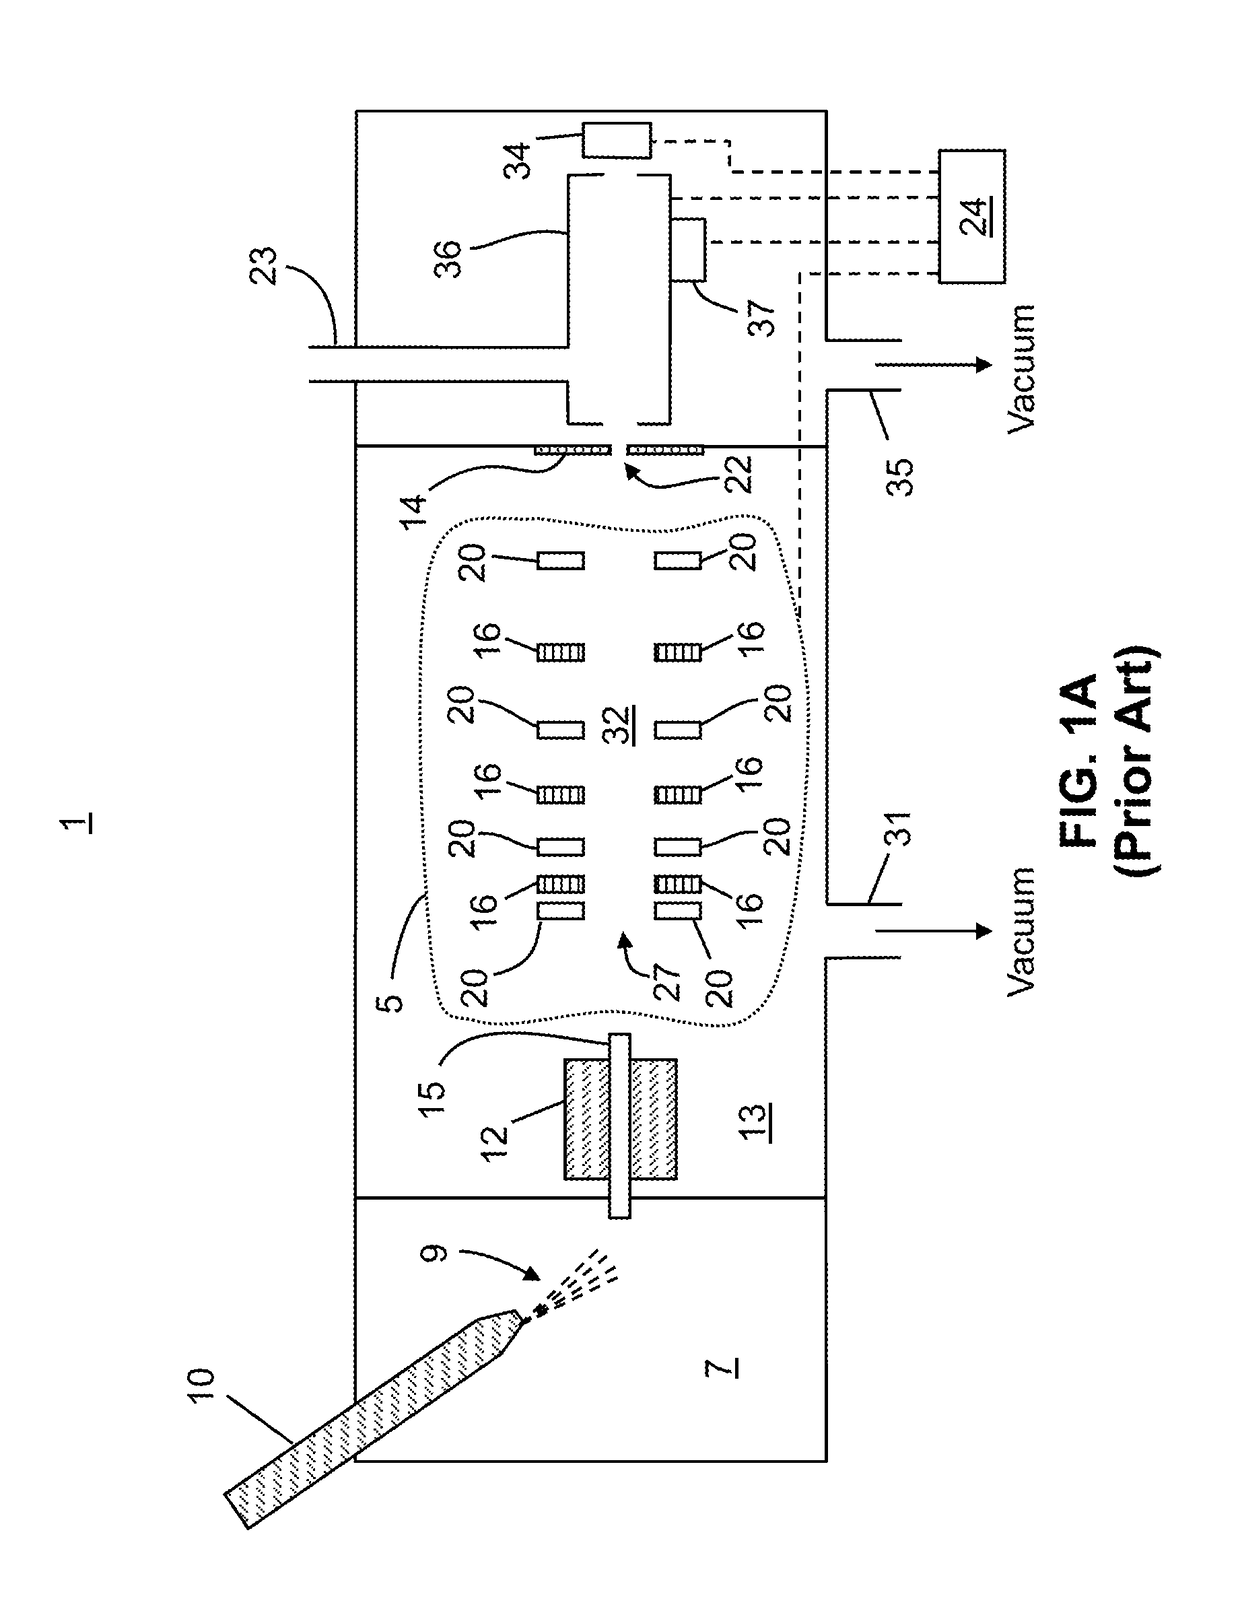 System for transferring ions in a mass spectrometer